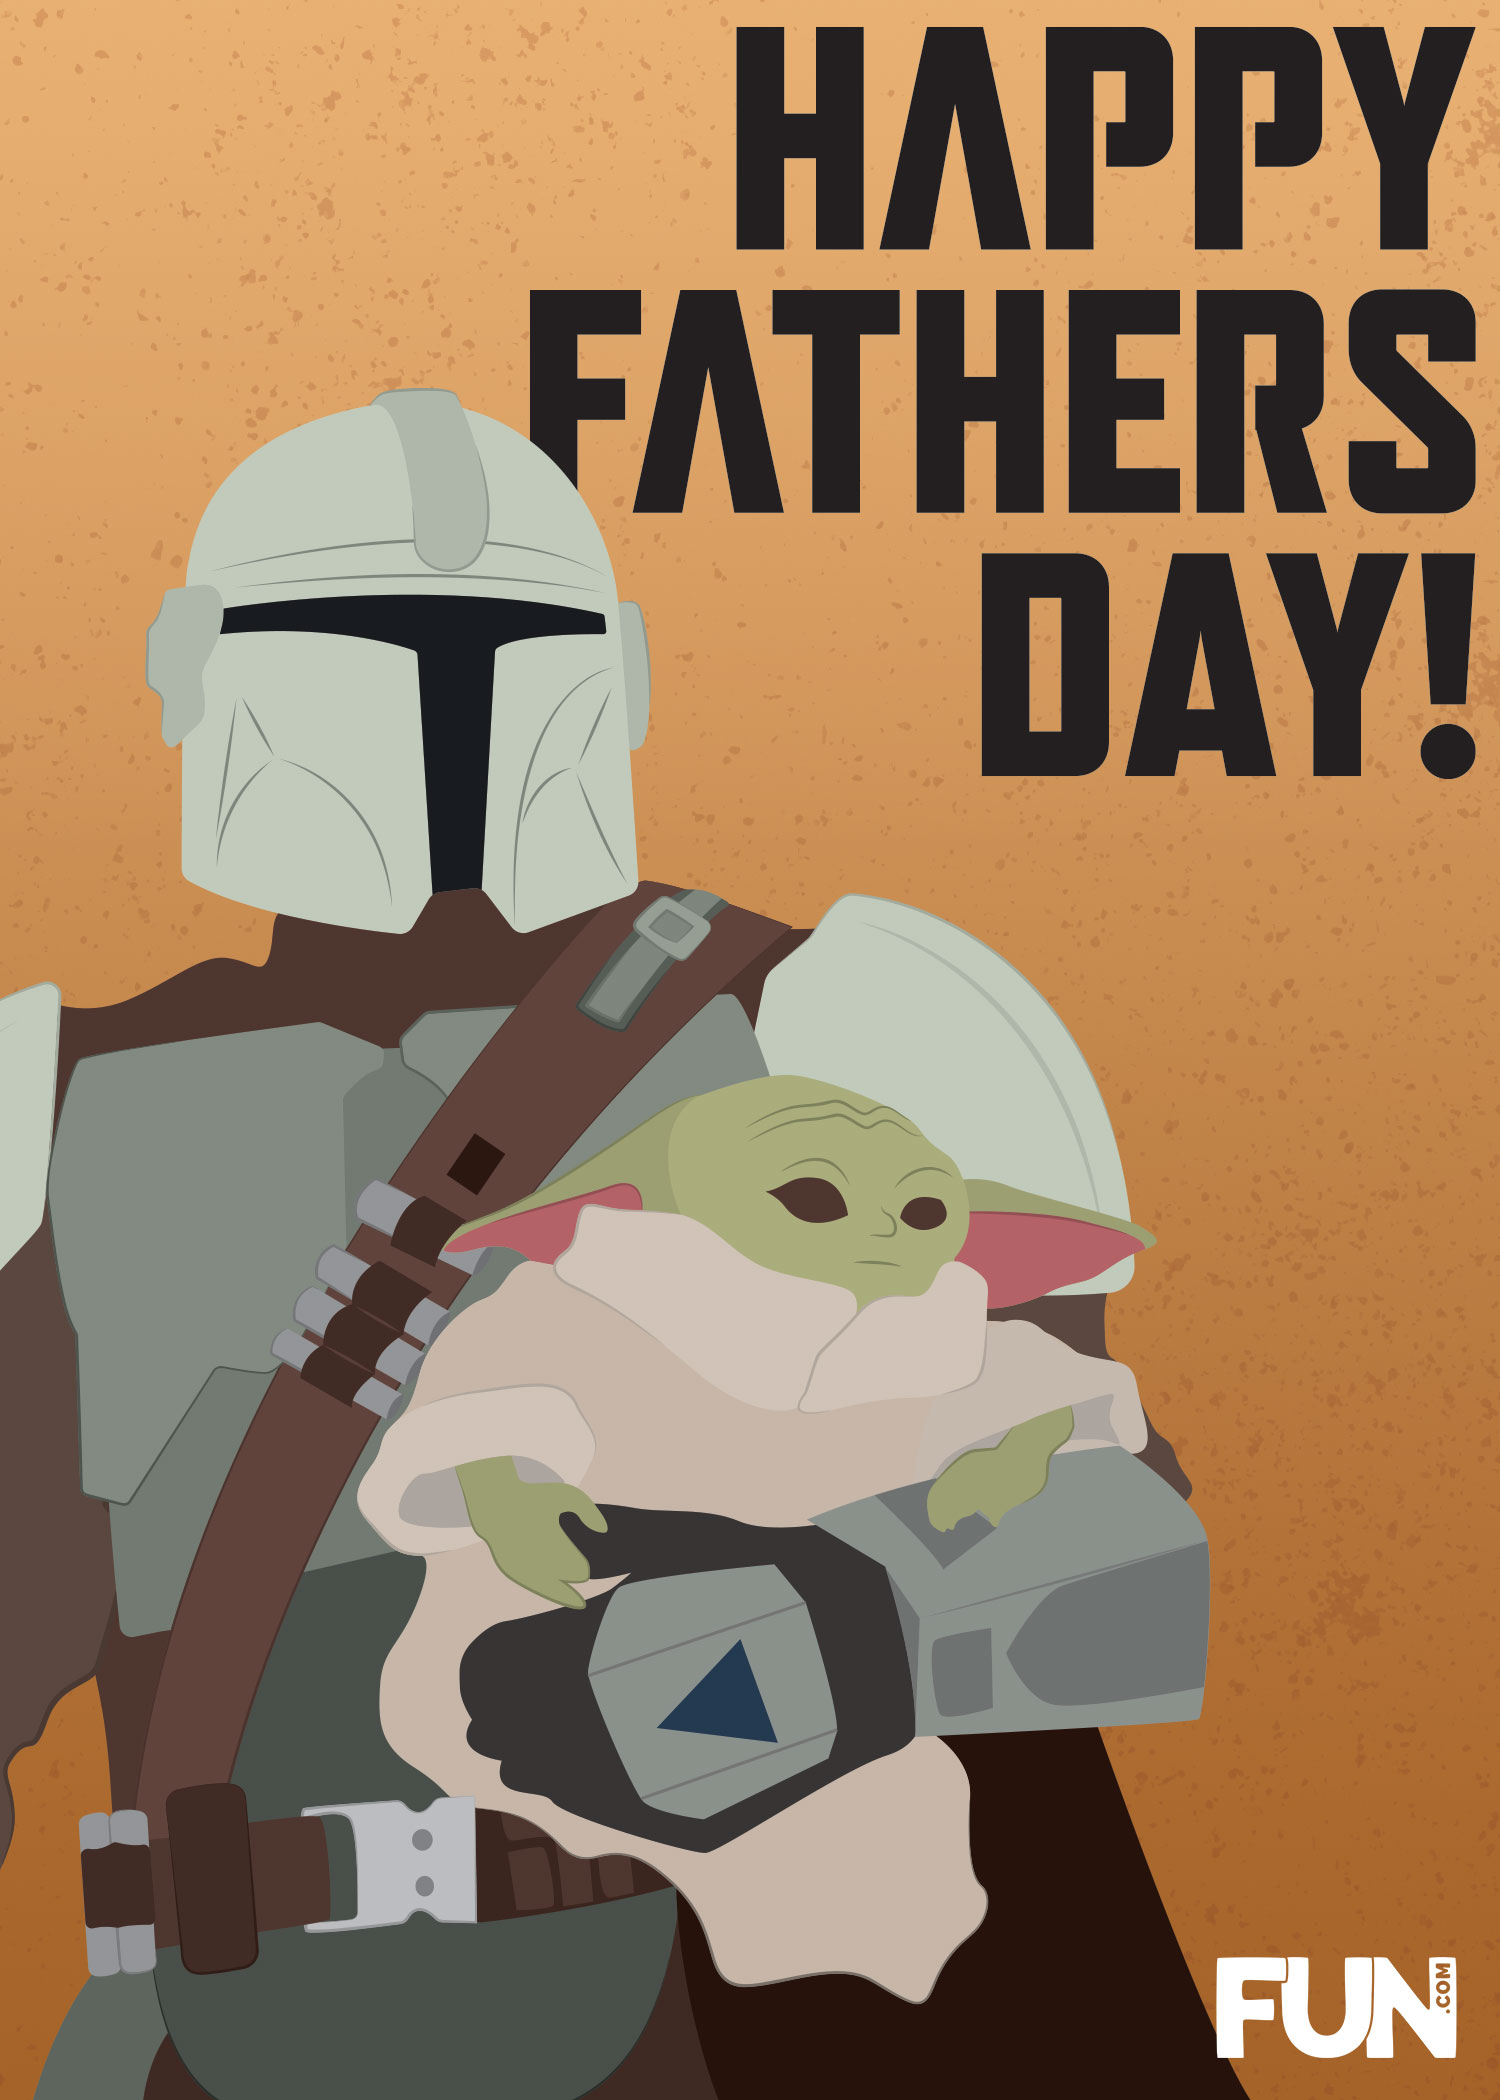 The Mandalorian and Grogu Father's Day Card